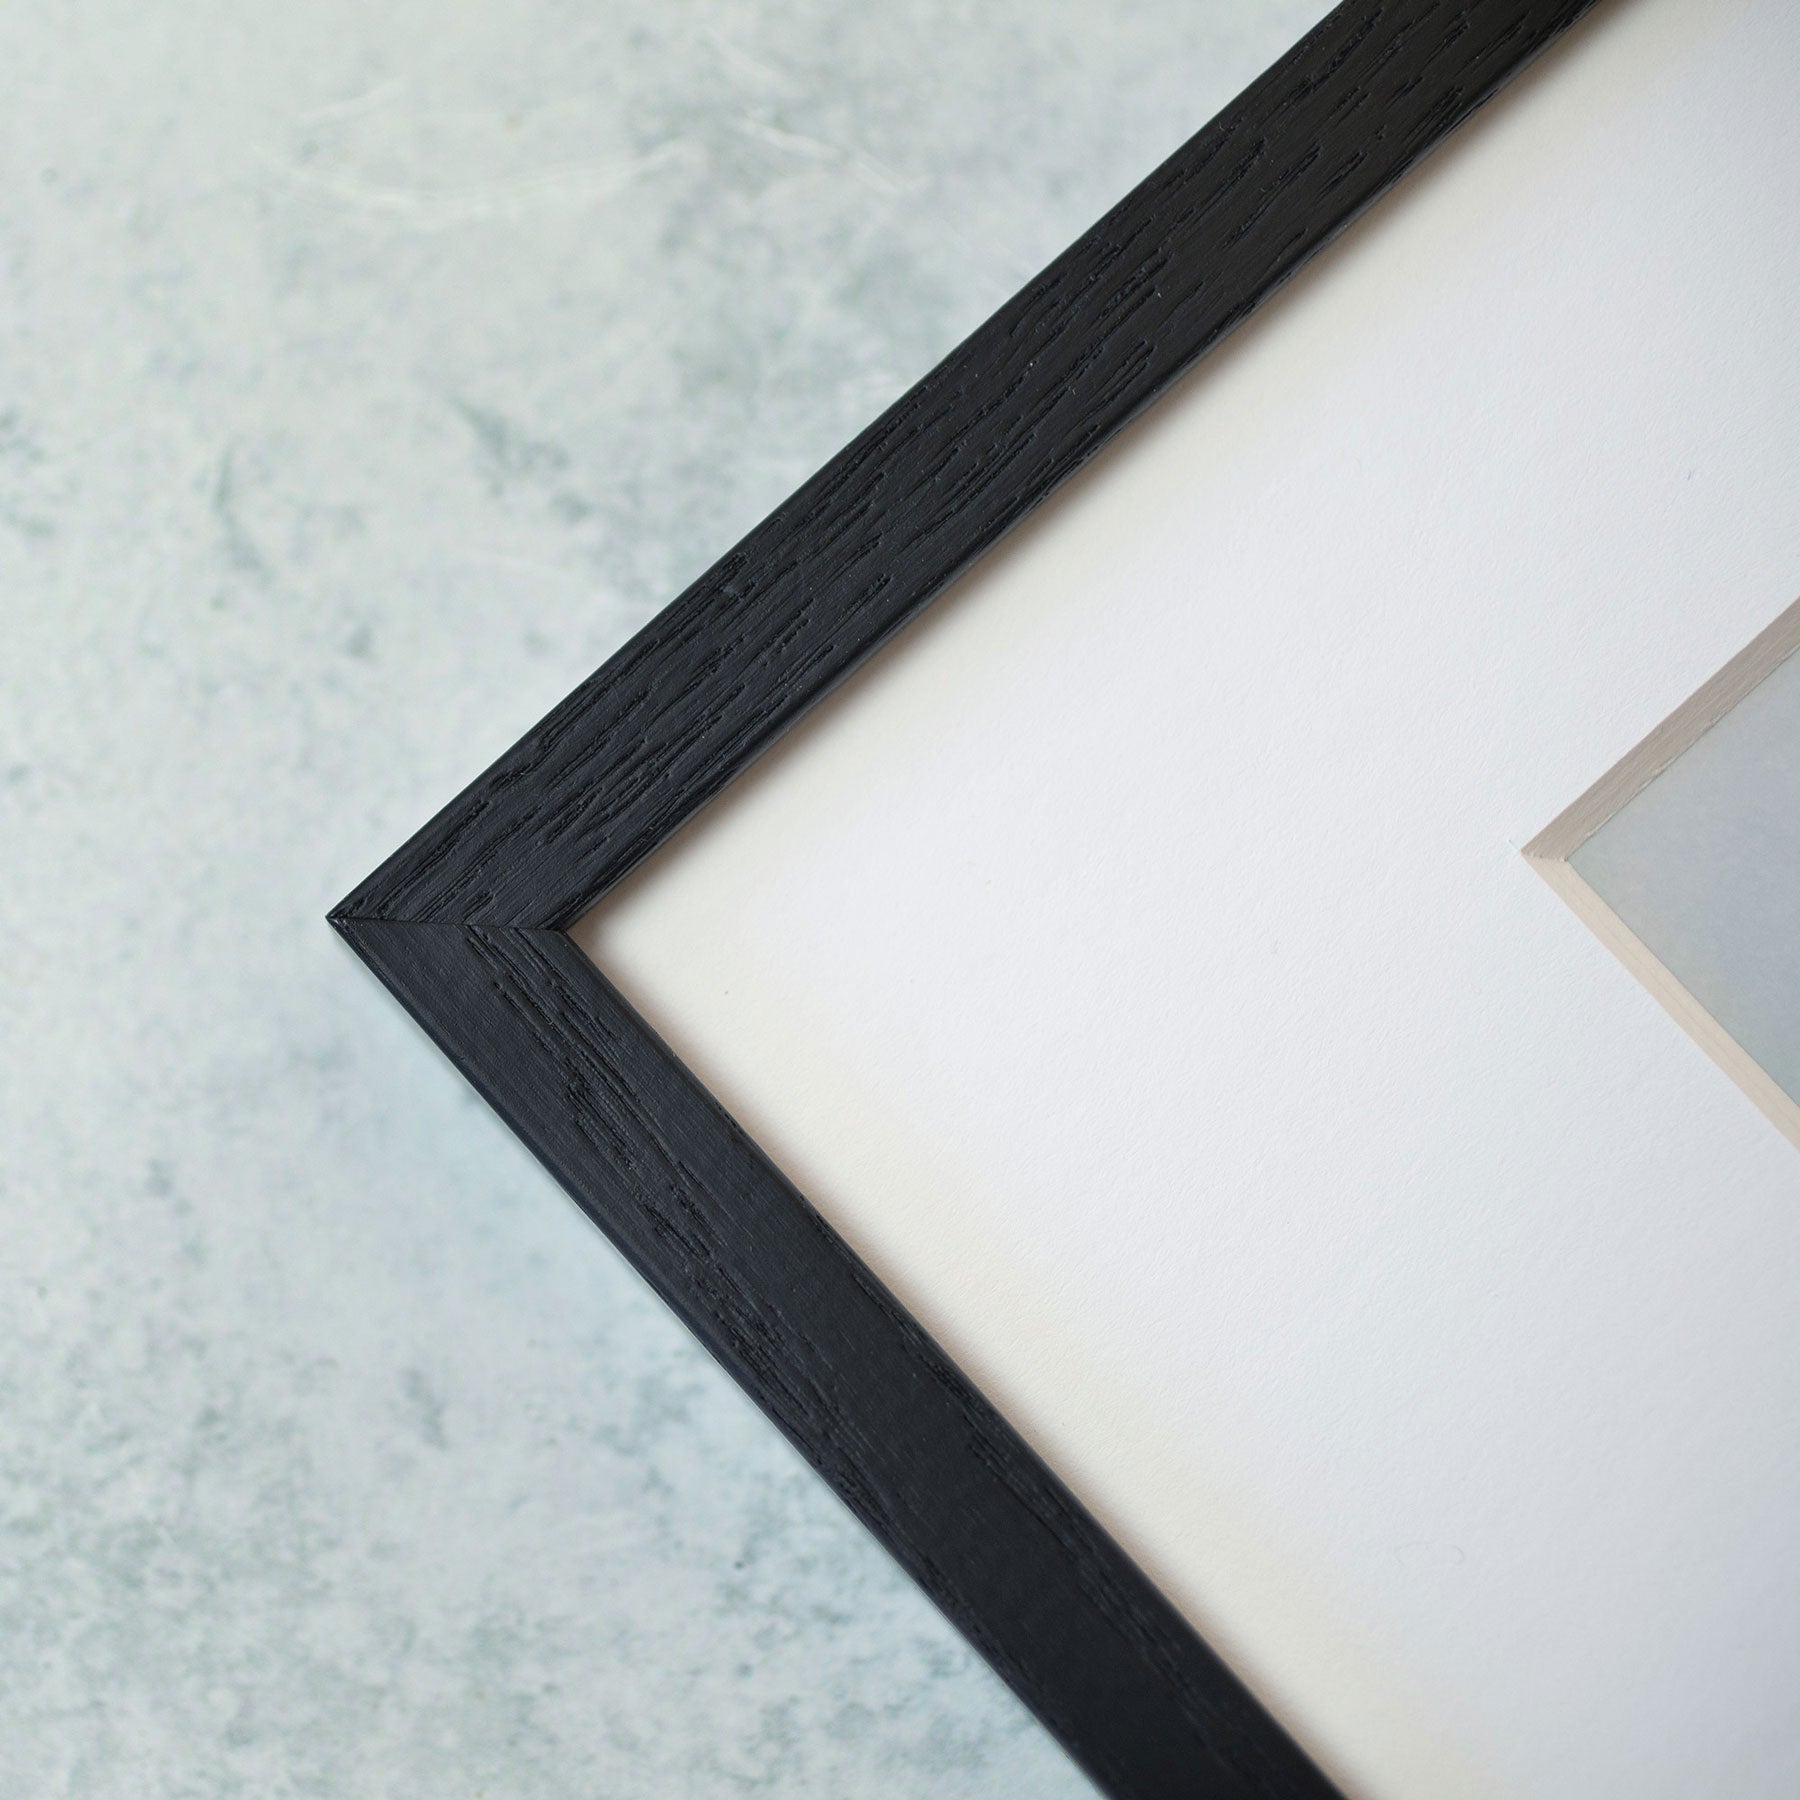 Close-up of a black textured Offley Green picture frame corner with a part of a white canvas and a small section of a beige mat visible inside, holding archival photographic paper. The background is a soft gray surface.